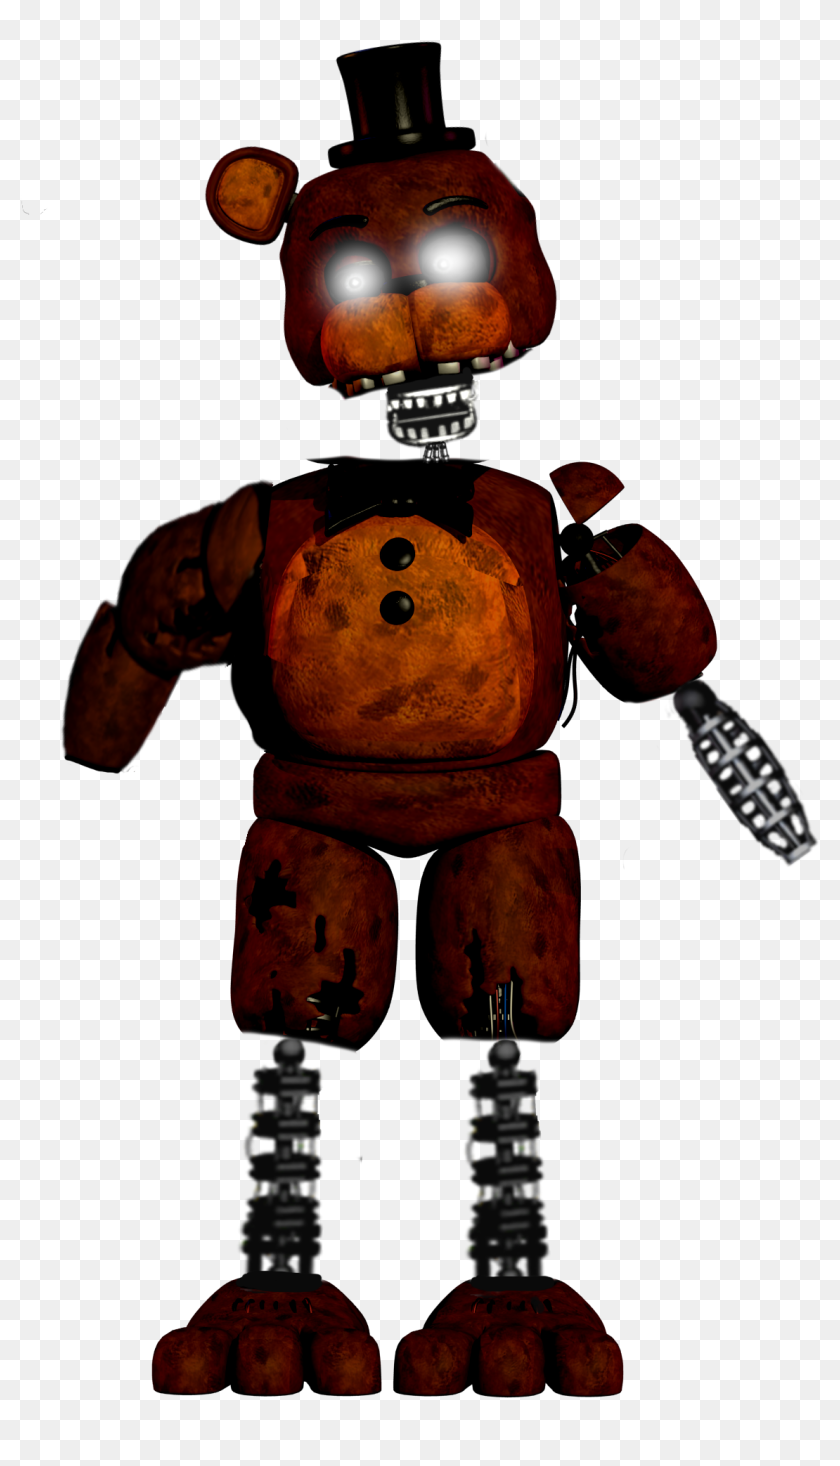 Imagenes De Ignited Freddy, HD Png Download - 1138x1933(#6745795) - PngFind